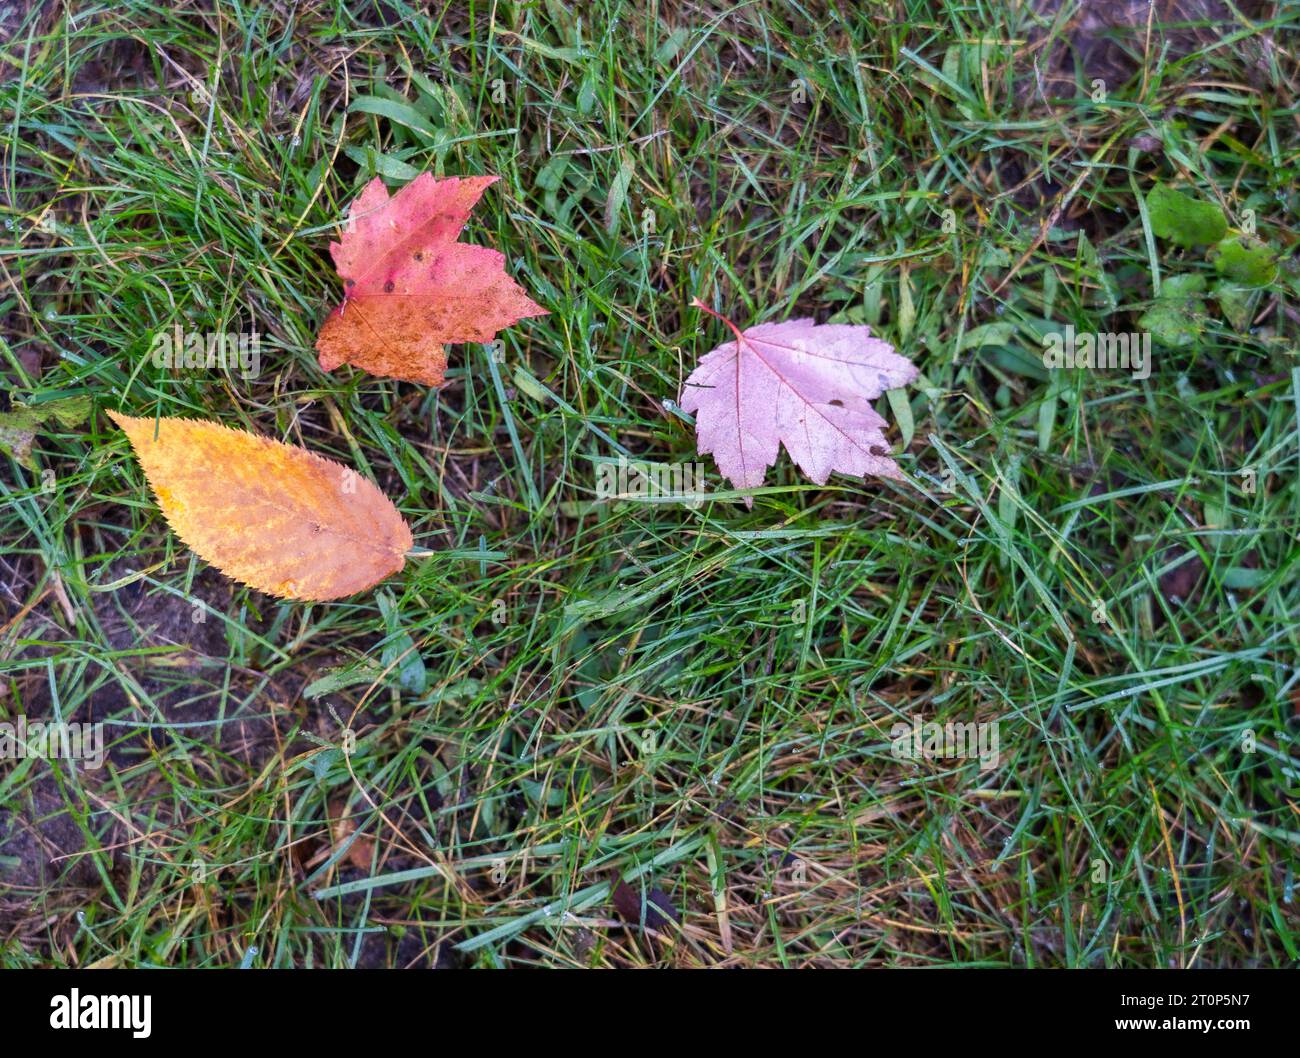 Three colorful fallen leaves in autumn rest on grassy ground. Birch and maple leaves are colorful with unique patterns. Stock Photo